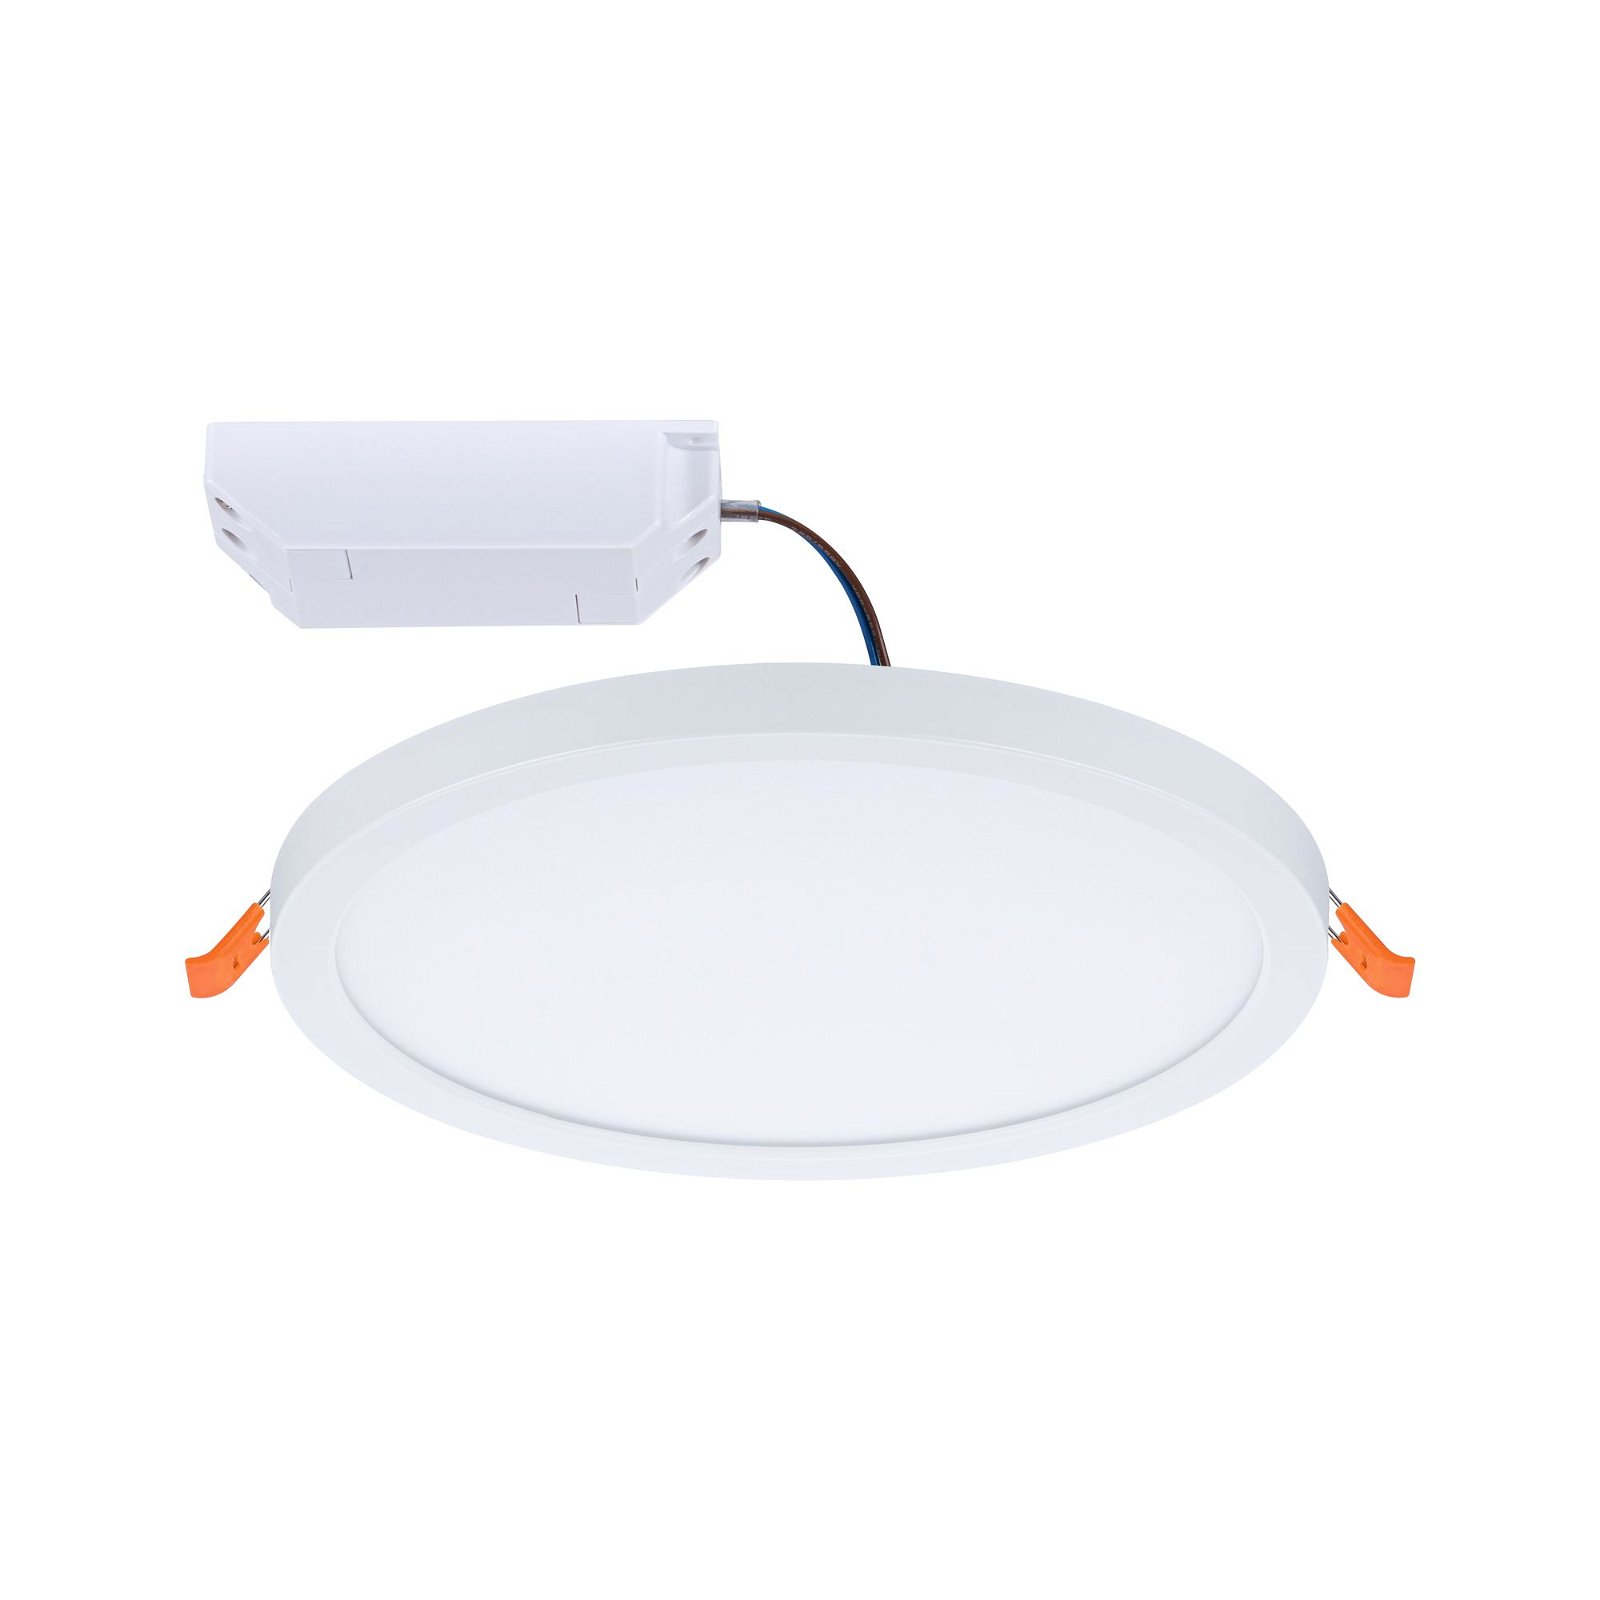 VariFit LED-inbouwpaneel Areo IP44 rond 175mm 13W 1200lm 3000K Wit